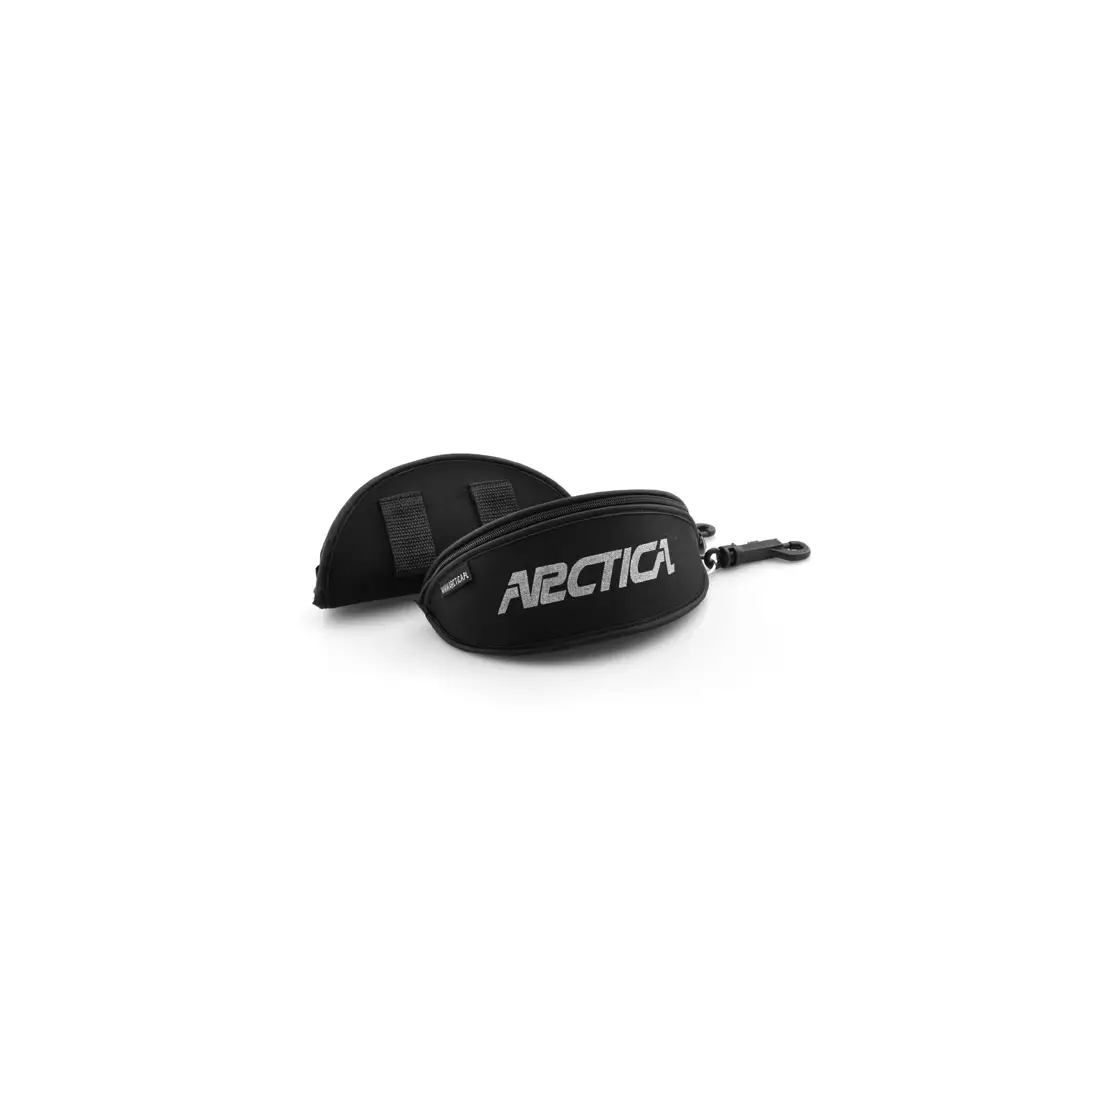 ARCTICA cycling/sports glasses, S 196